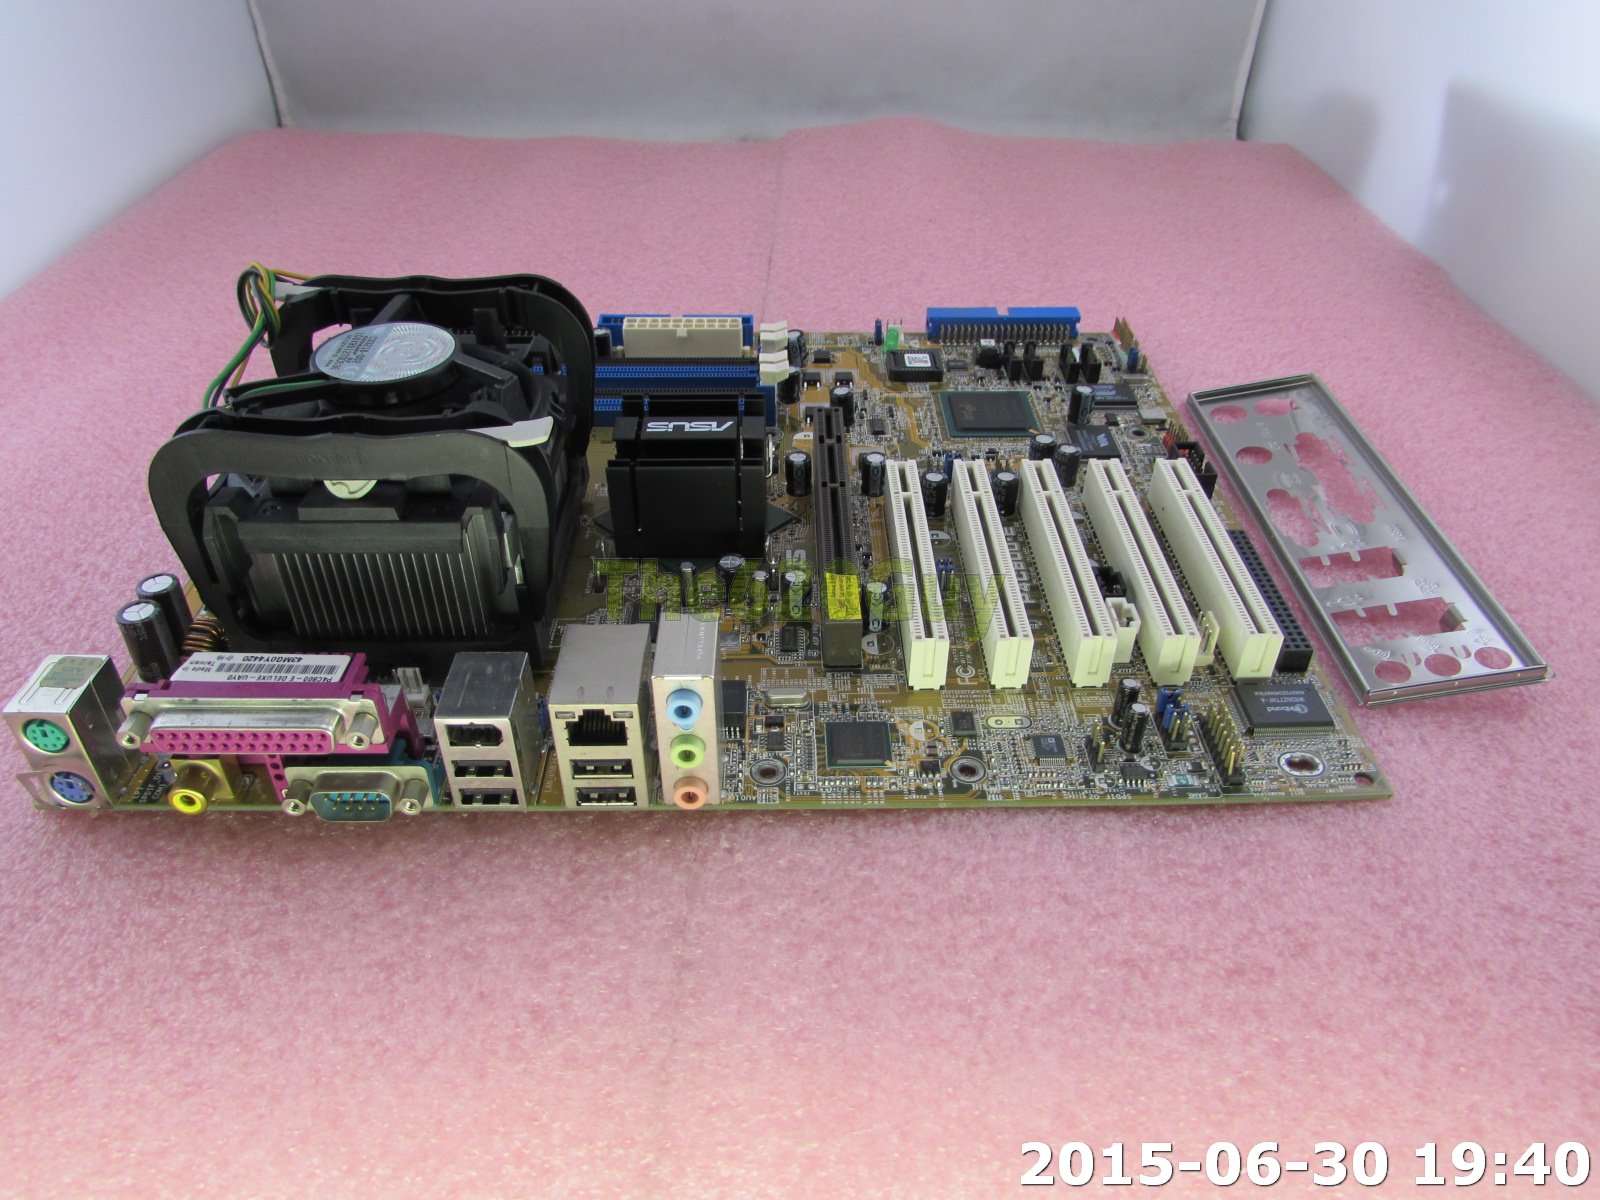 Asus P4c800 E Deluxe Motherboard Drivers